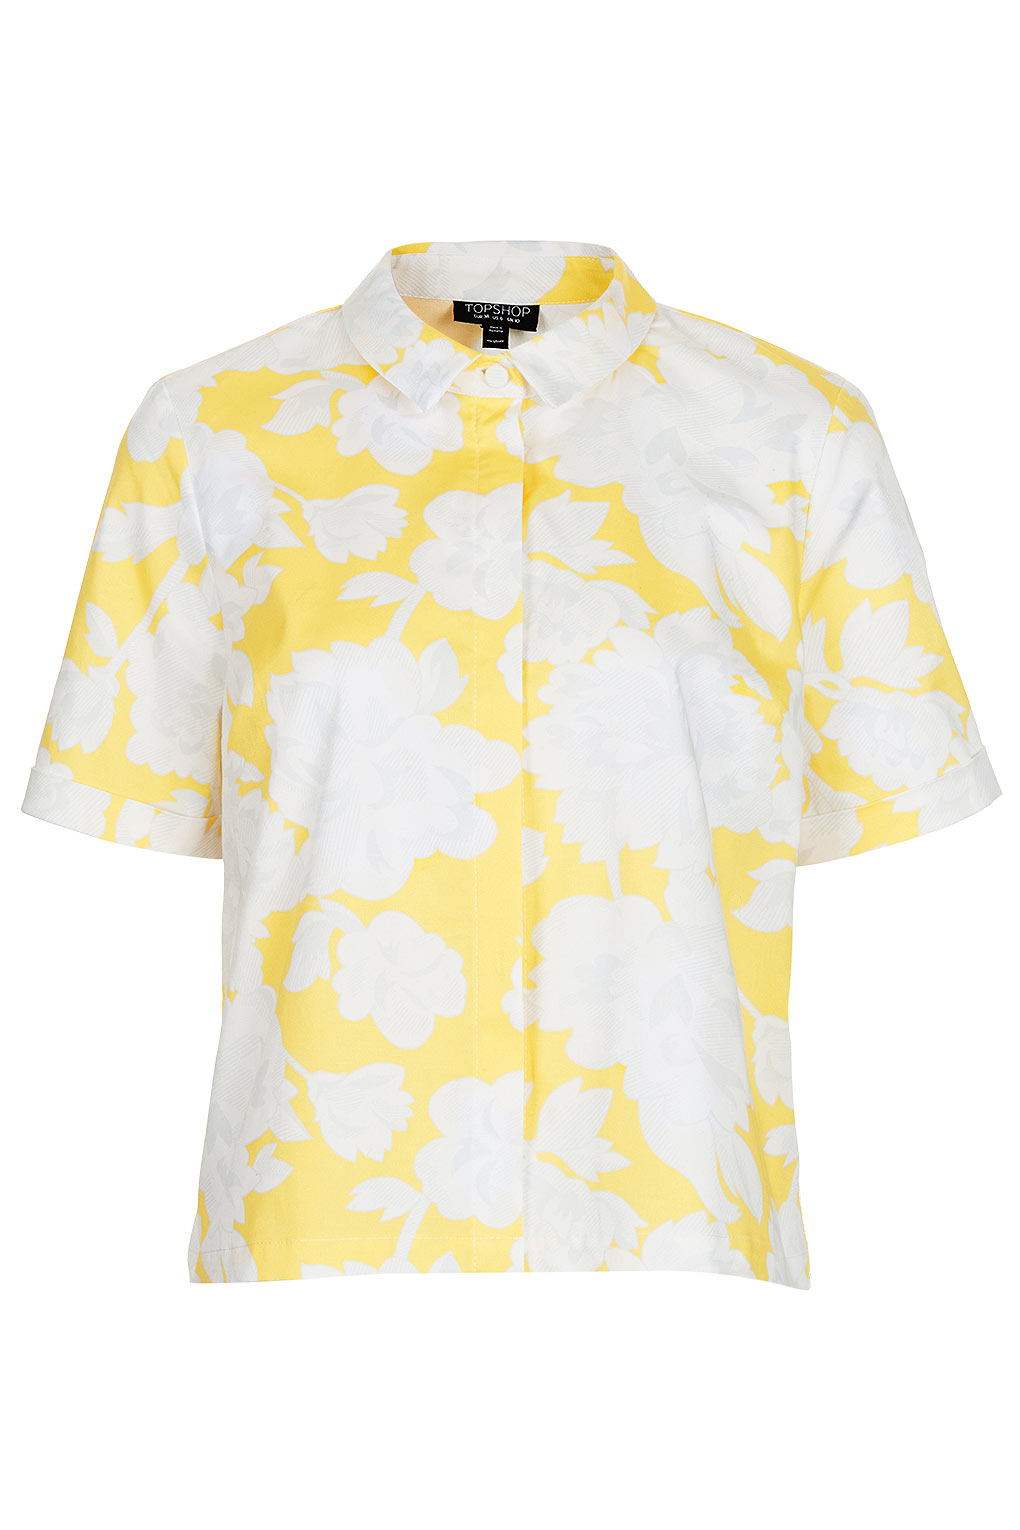 Topshop Summer Floral Boxy Shirt in Yellow | Lyst